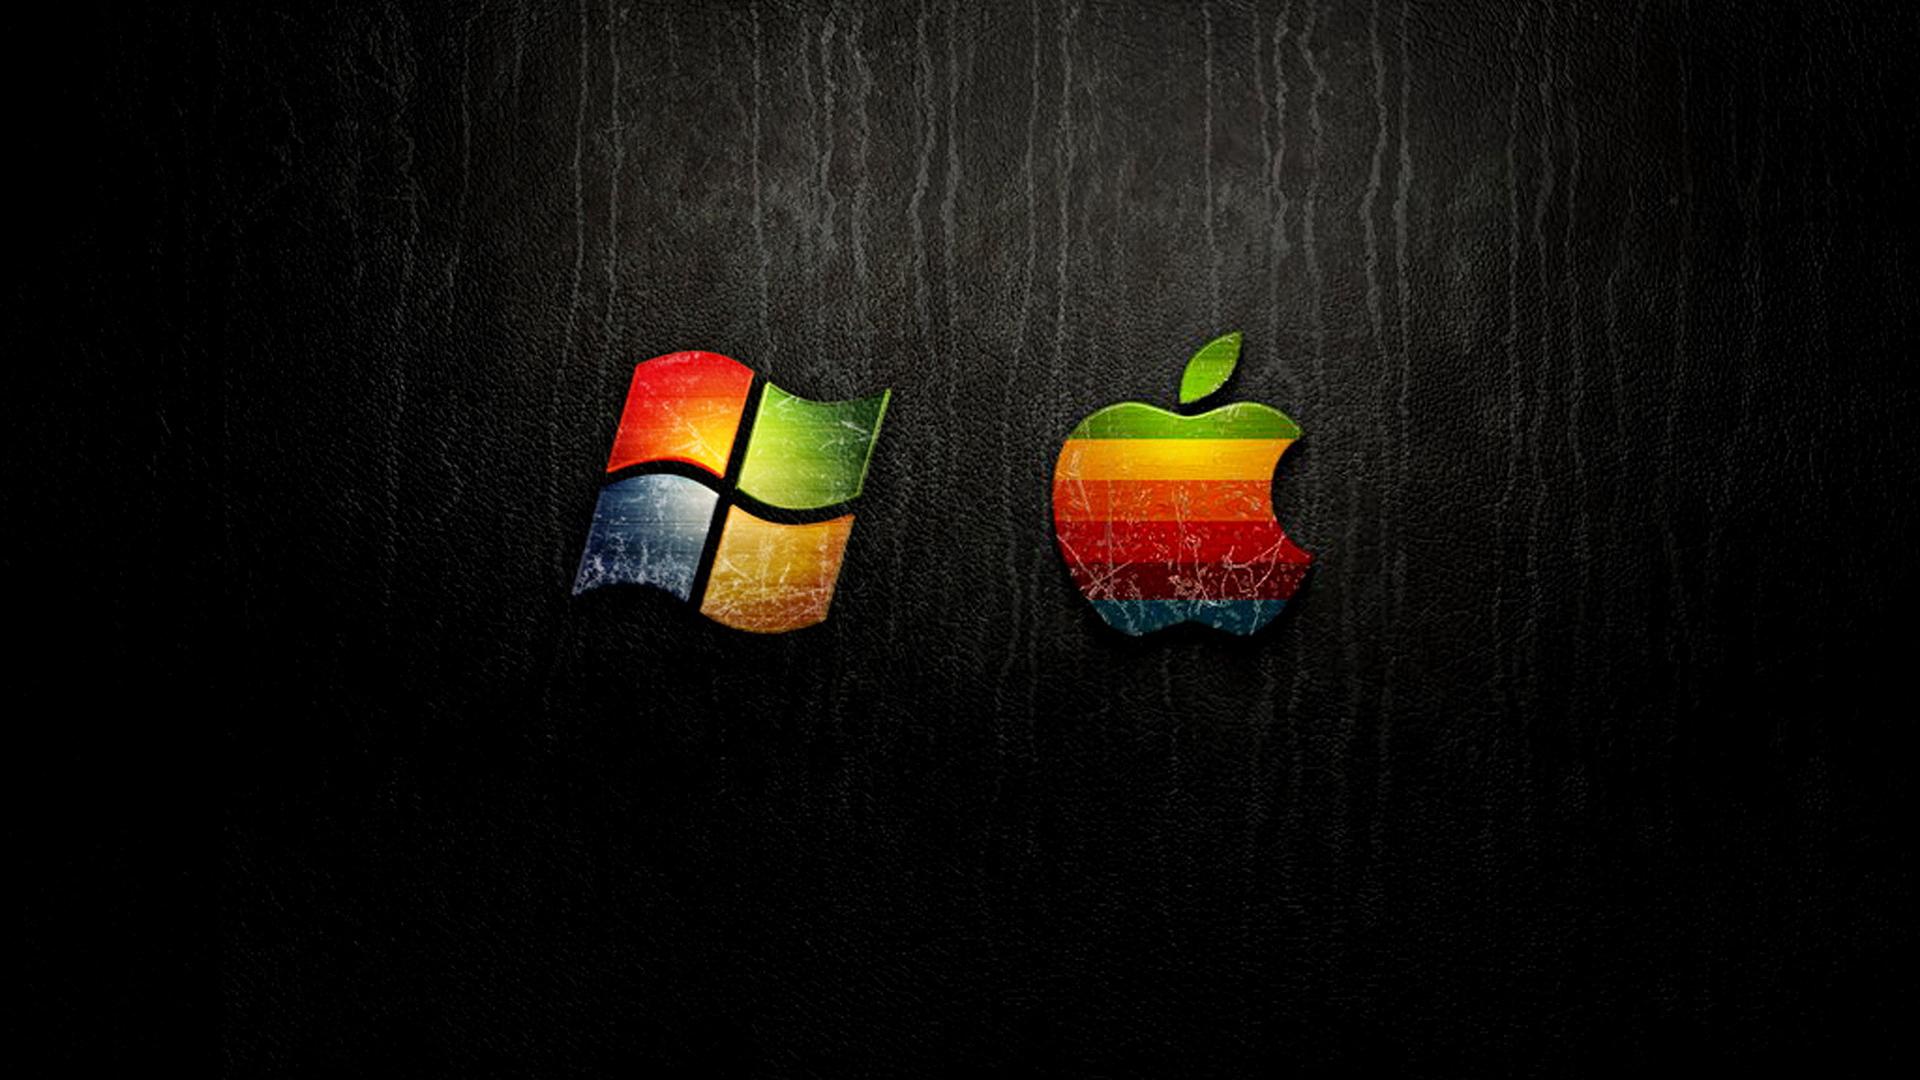 HD Colorful Windows And Apple Wallpaper Background For Desktop